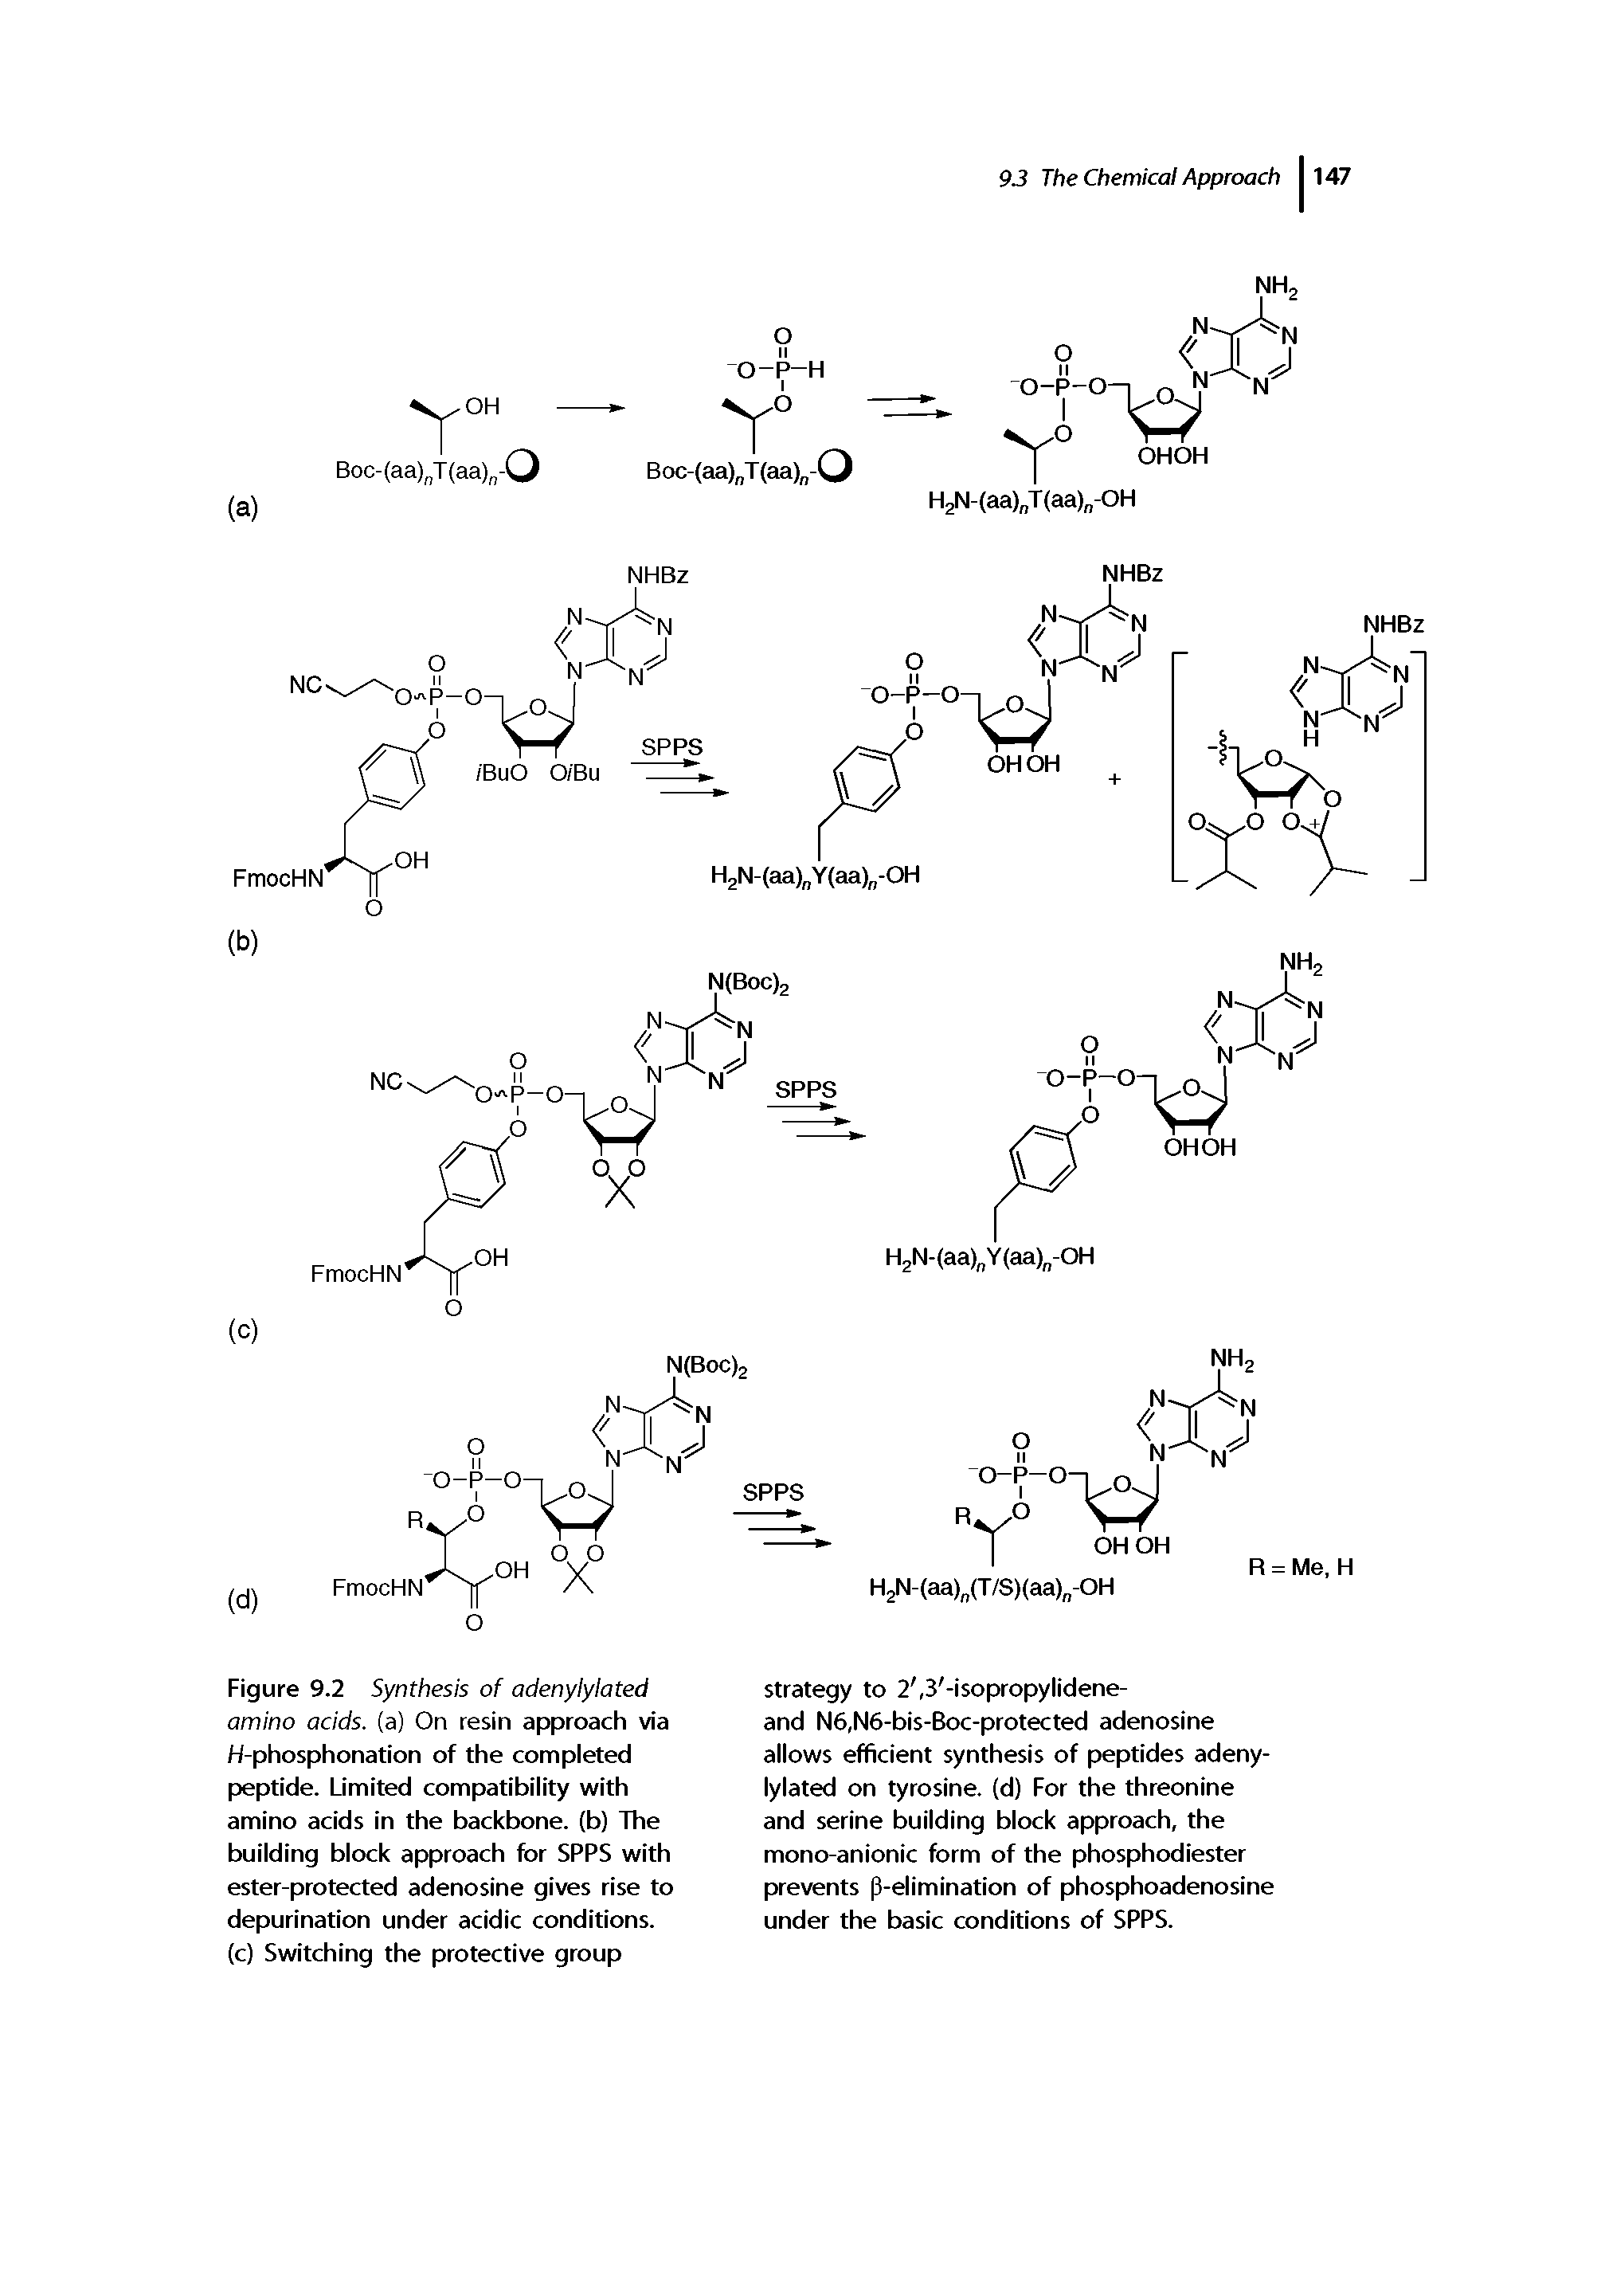 Figure 9.2 Synthesis of adenylylated amino acids, (a) On resin approach via H-phosphonation of the compieted peptide. Limited compatibiiity with amino acids in the backbone, (b) The buiiding biock approach for SPPS with ester-protected adenosine gives rise to depurination under acidic conditions, (c) Switching the protective group...